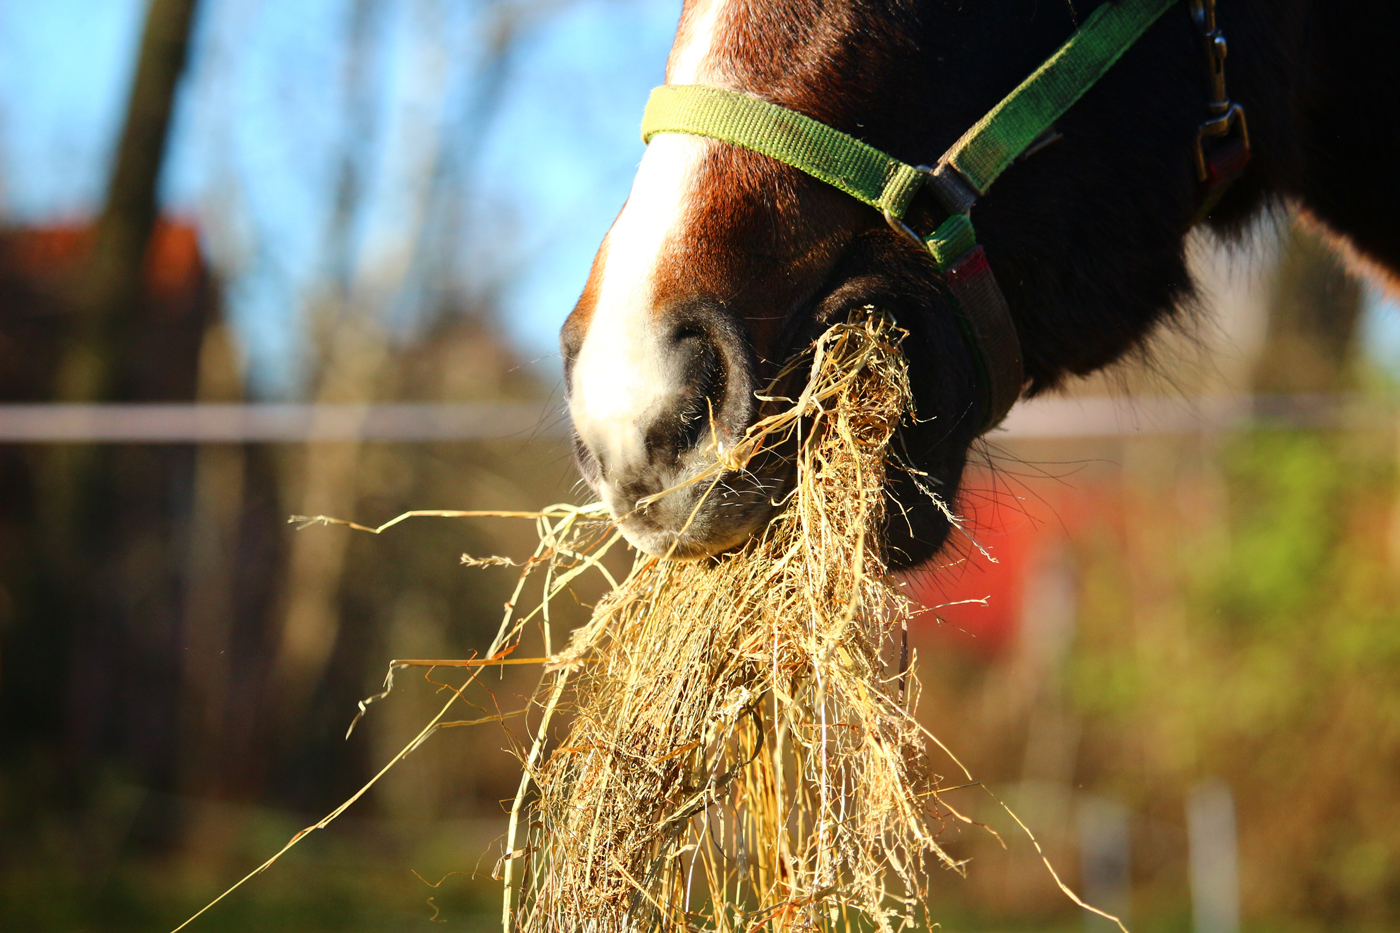 A horse eating hay in the sun